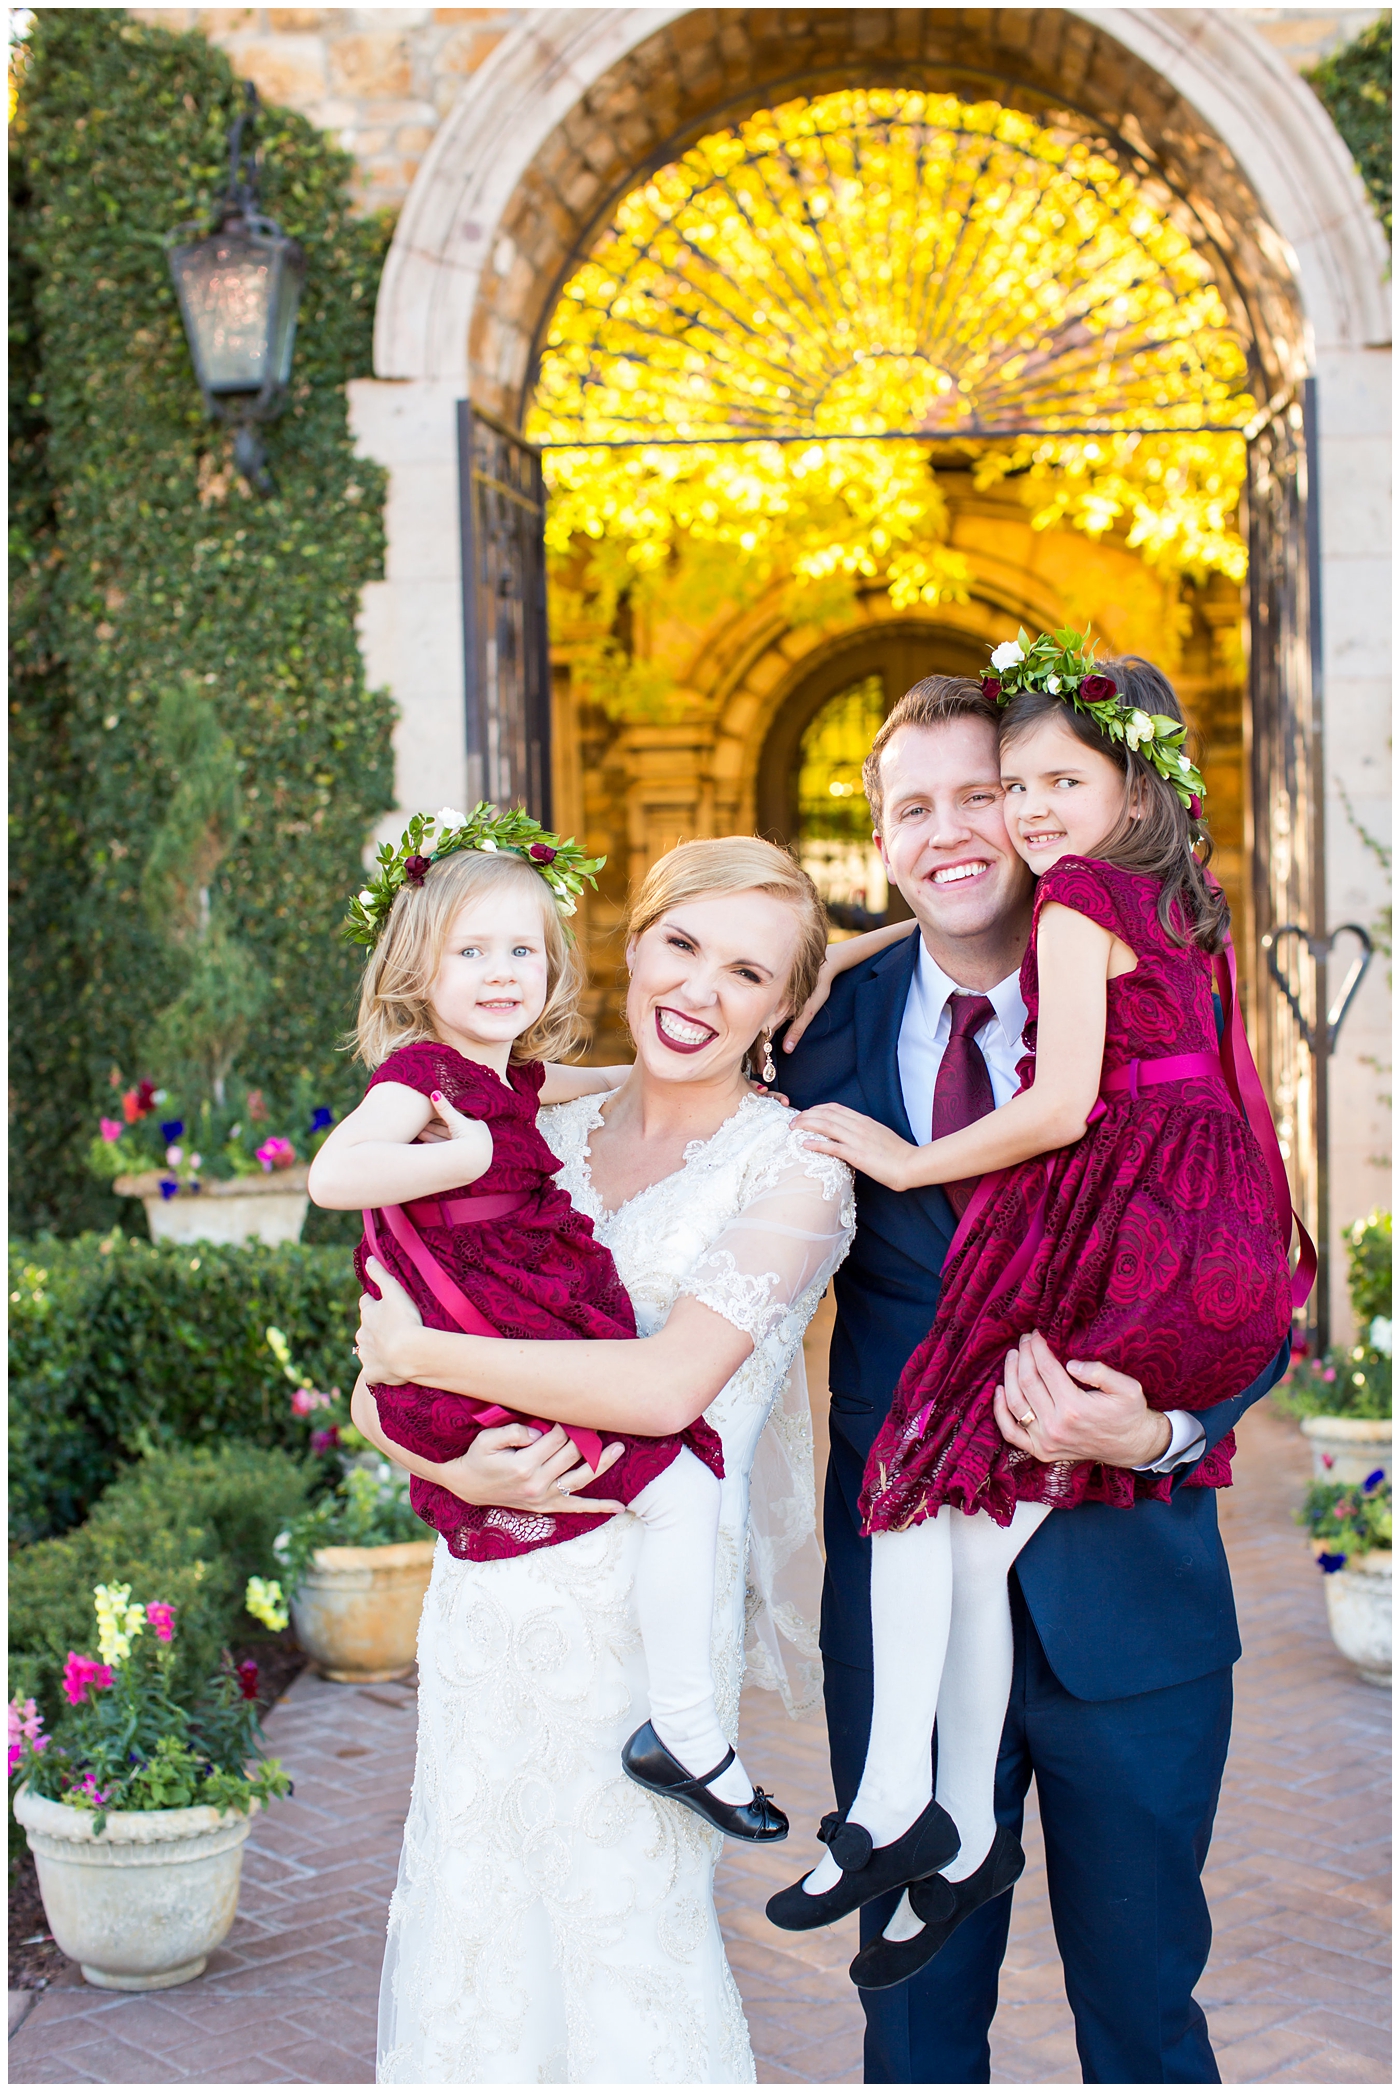 bride in sleeved lace dress with burgundy, white, and green wedding bouquet and groom in navy suit with burgundy tie wedding day portrait with flower girls with floral head bands and burgundy dresses at Villa Siena